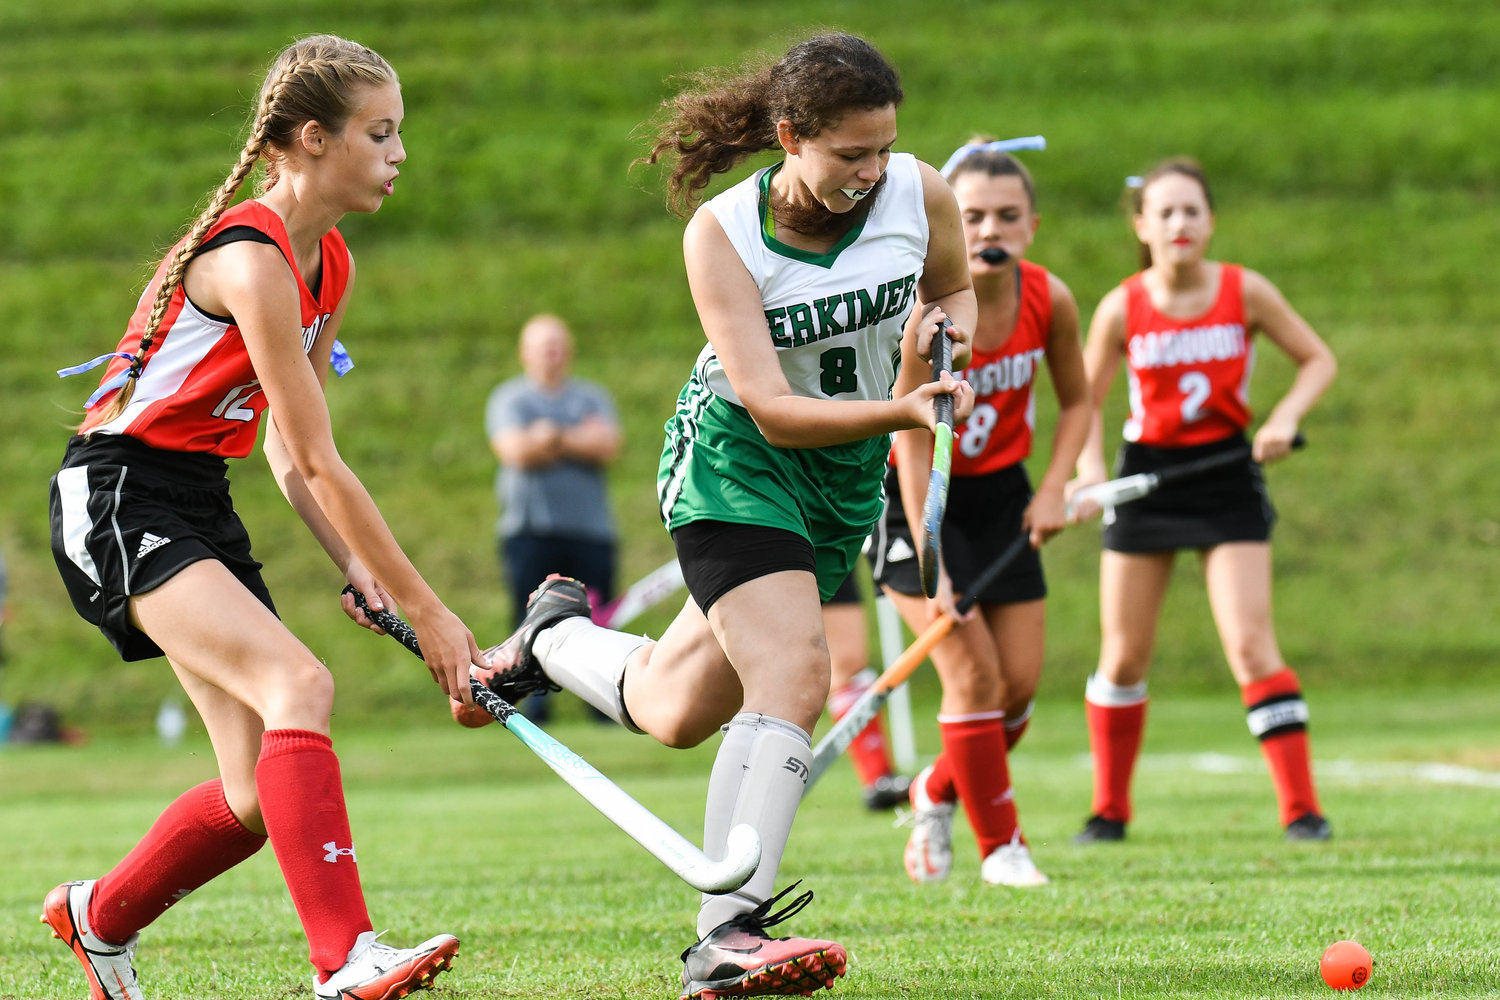 Herkimer player Iesha Deubel (8) moves the ball against Sauquoit Valley defender Emilie Fancett during the Center State Conference field hockey game on Monday in Herkimer. The two teams played to a scoreless tie.